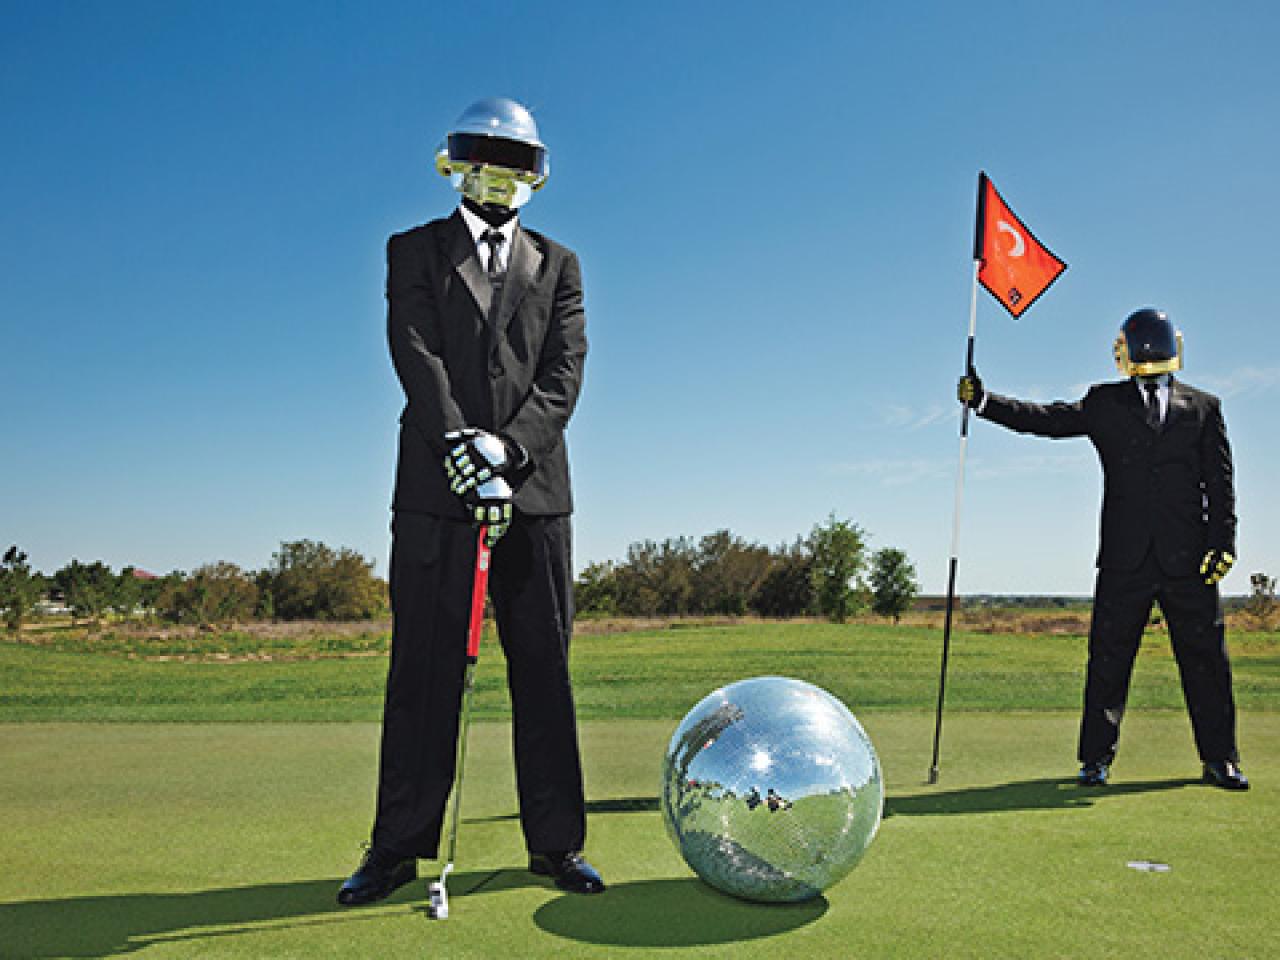 Golf & Music: The Holes Are Alive With The Sound Of Music | Golf Digest